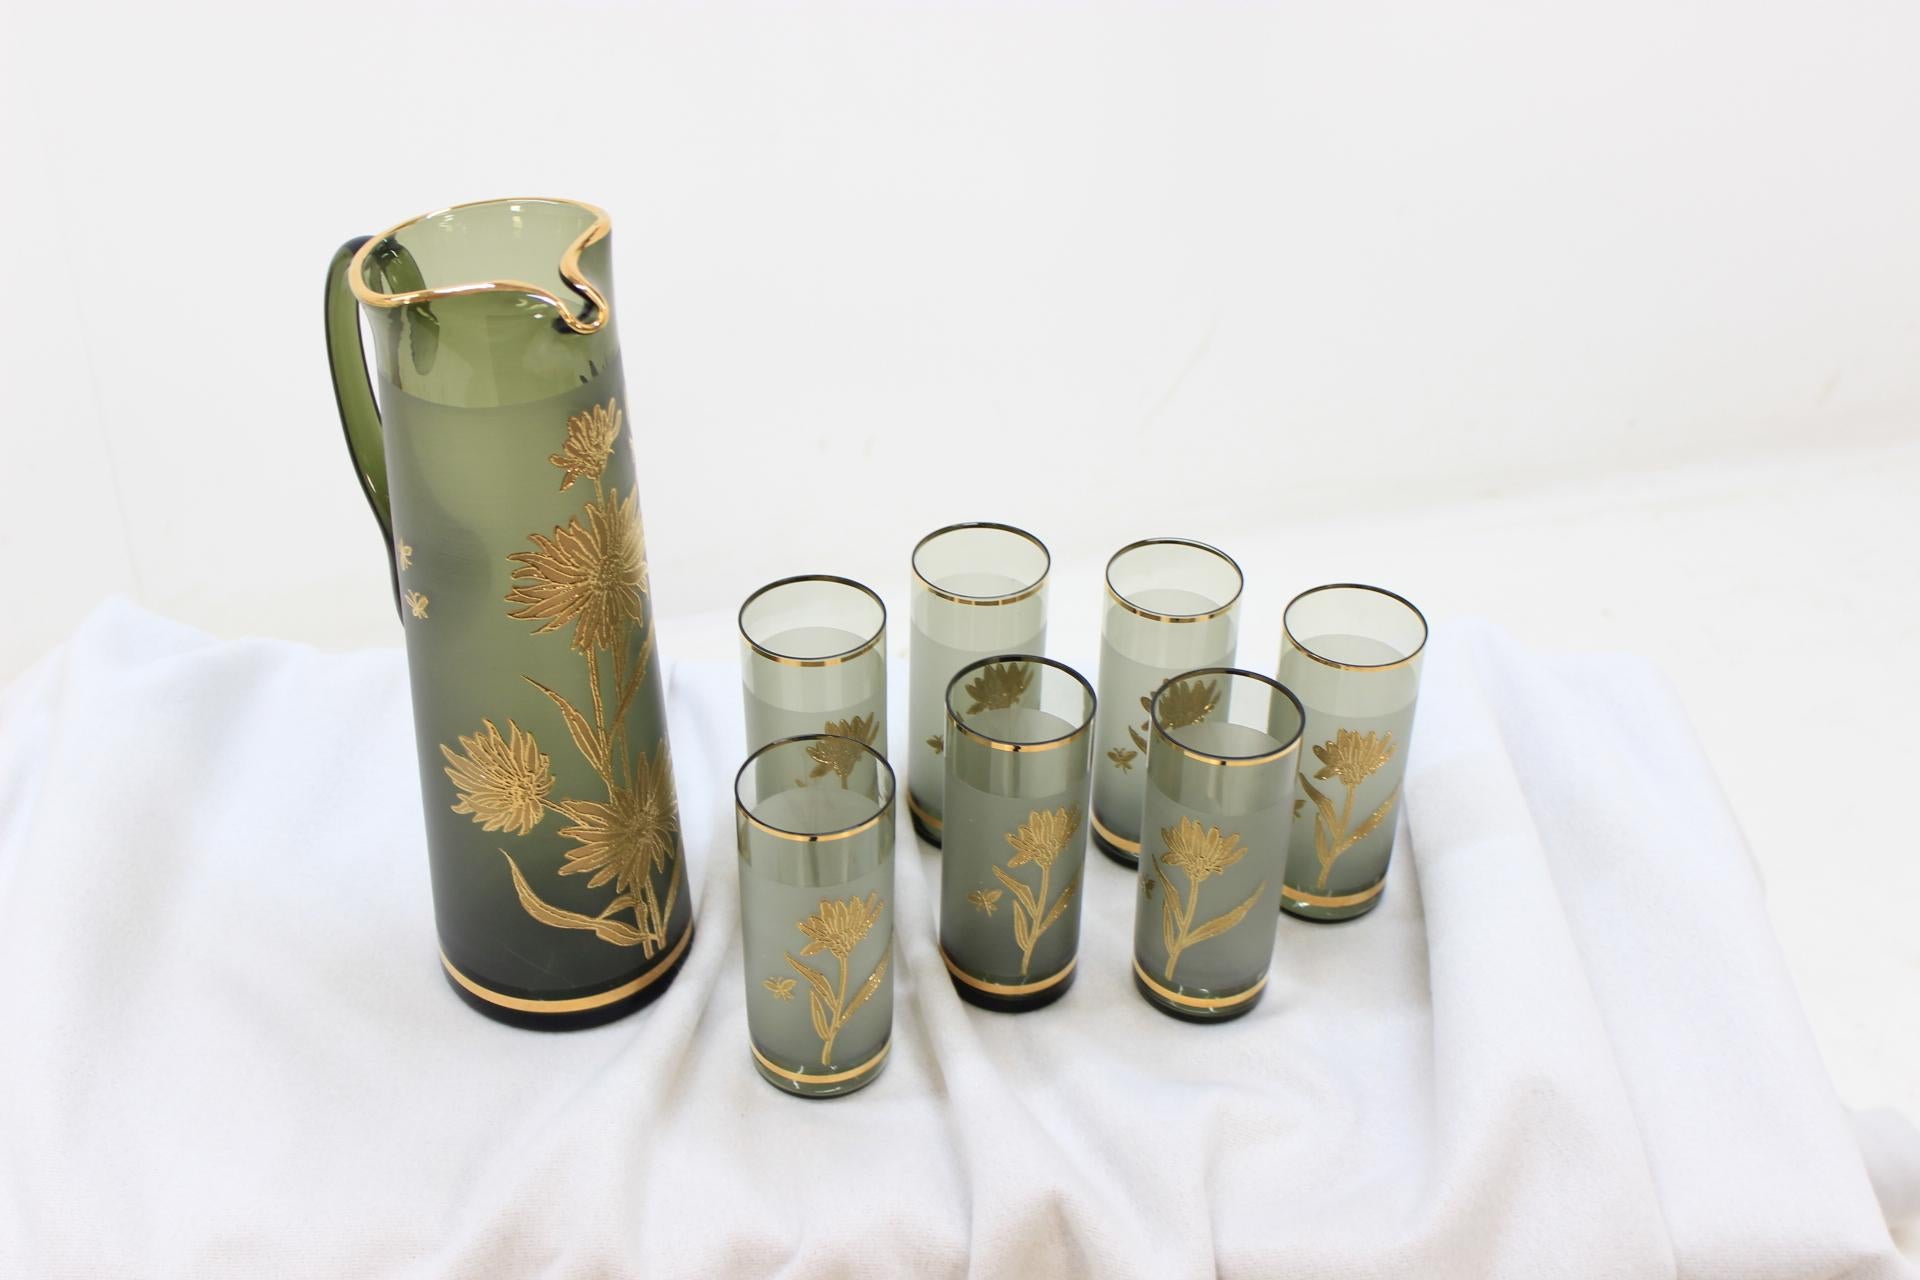 The items made of enamelled, and gilded green glass. On items are slices of gold. Dimensions of goblets 14x6x6 cm. are The set made in Czechoslovakia. Original condition.